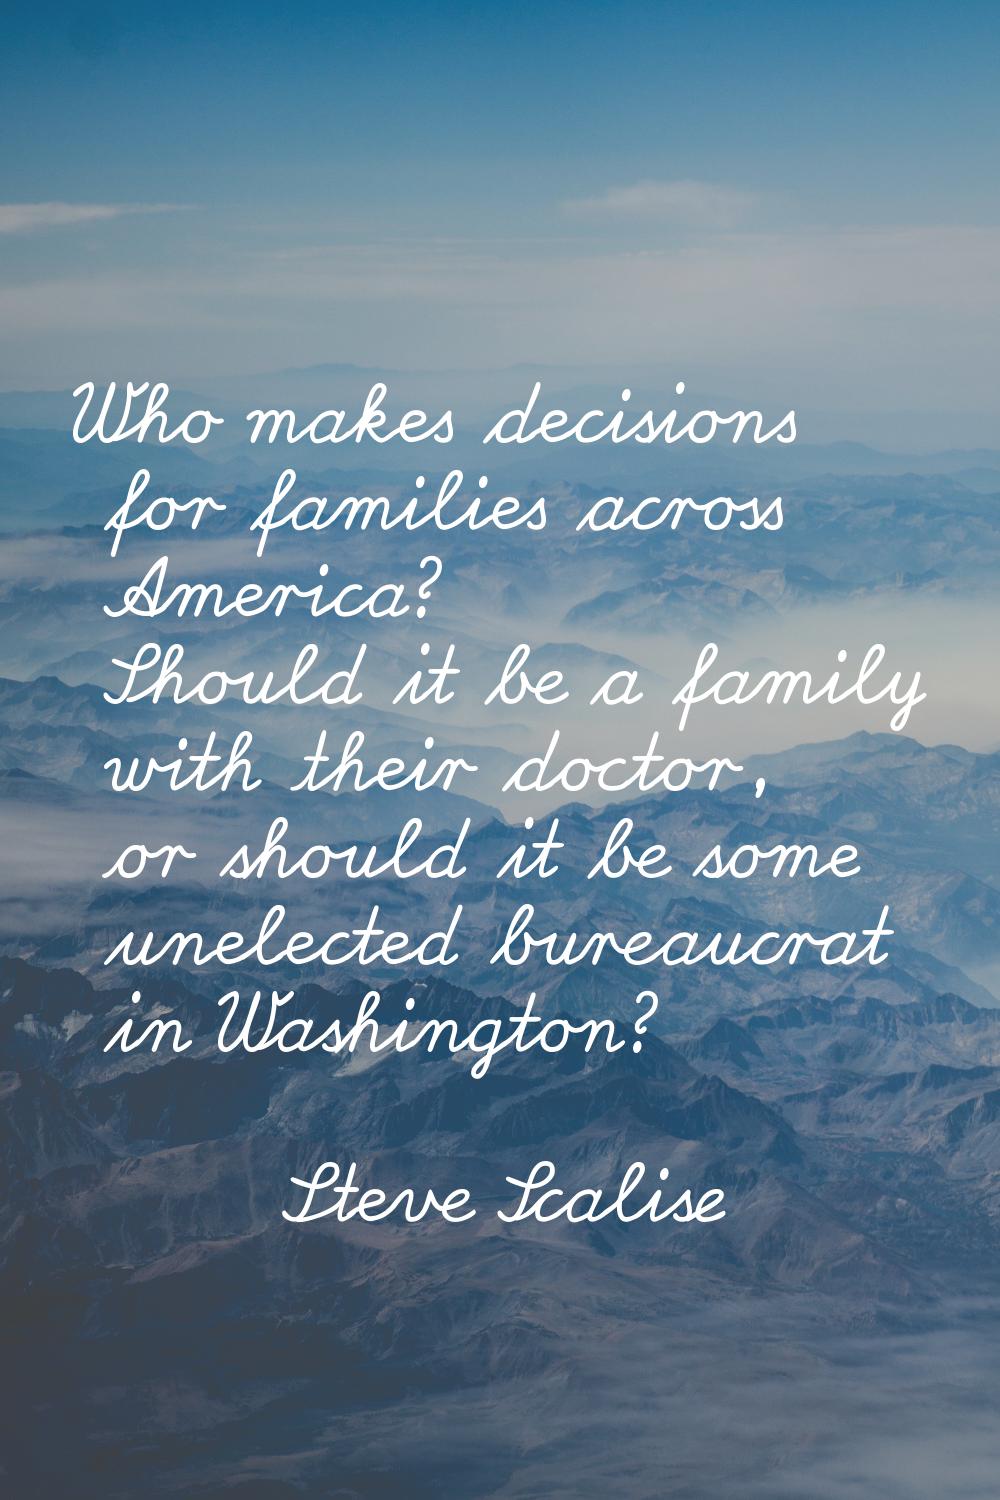 Who makes decisions for families across America? Should it be a family with their doctor, or should